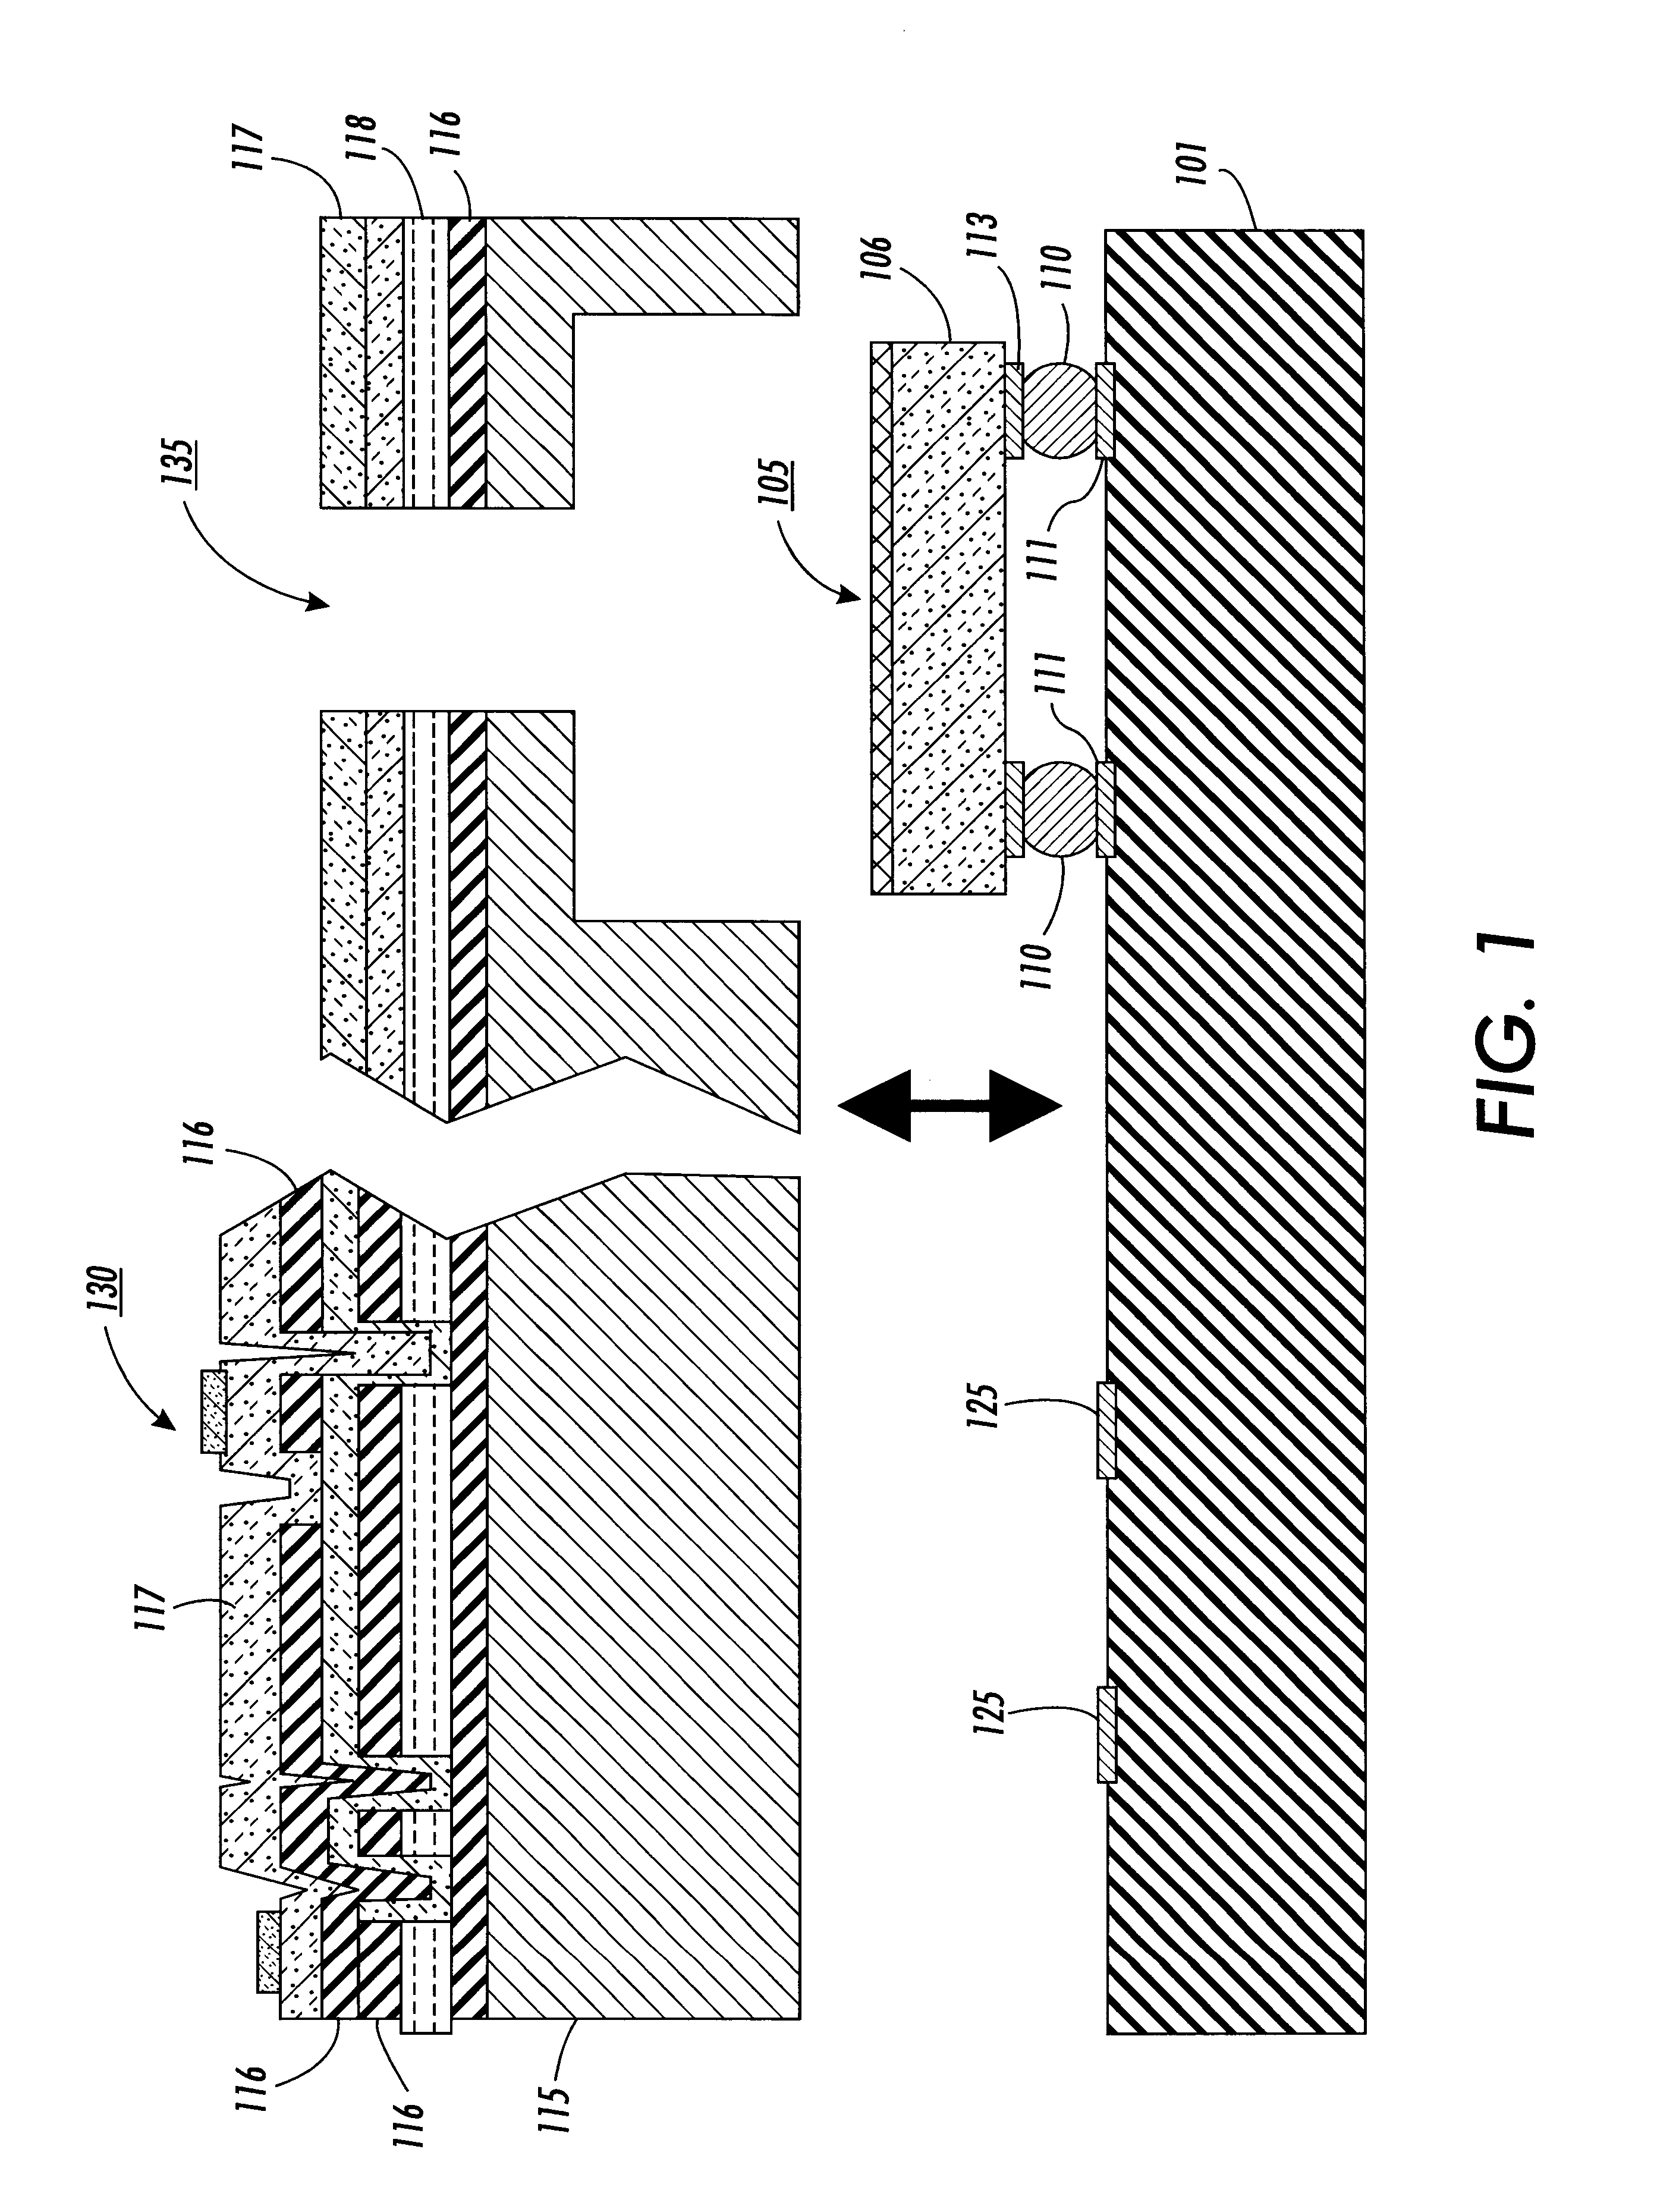 Method and apparatus for an integrated laser beam scanner using a carrier substrate